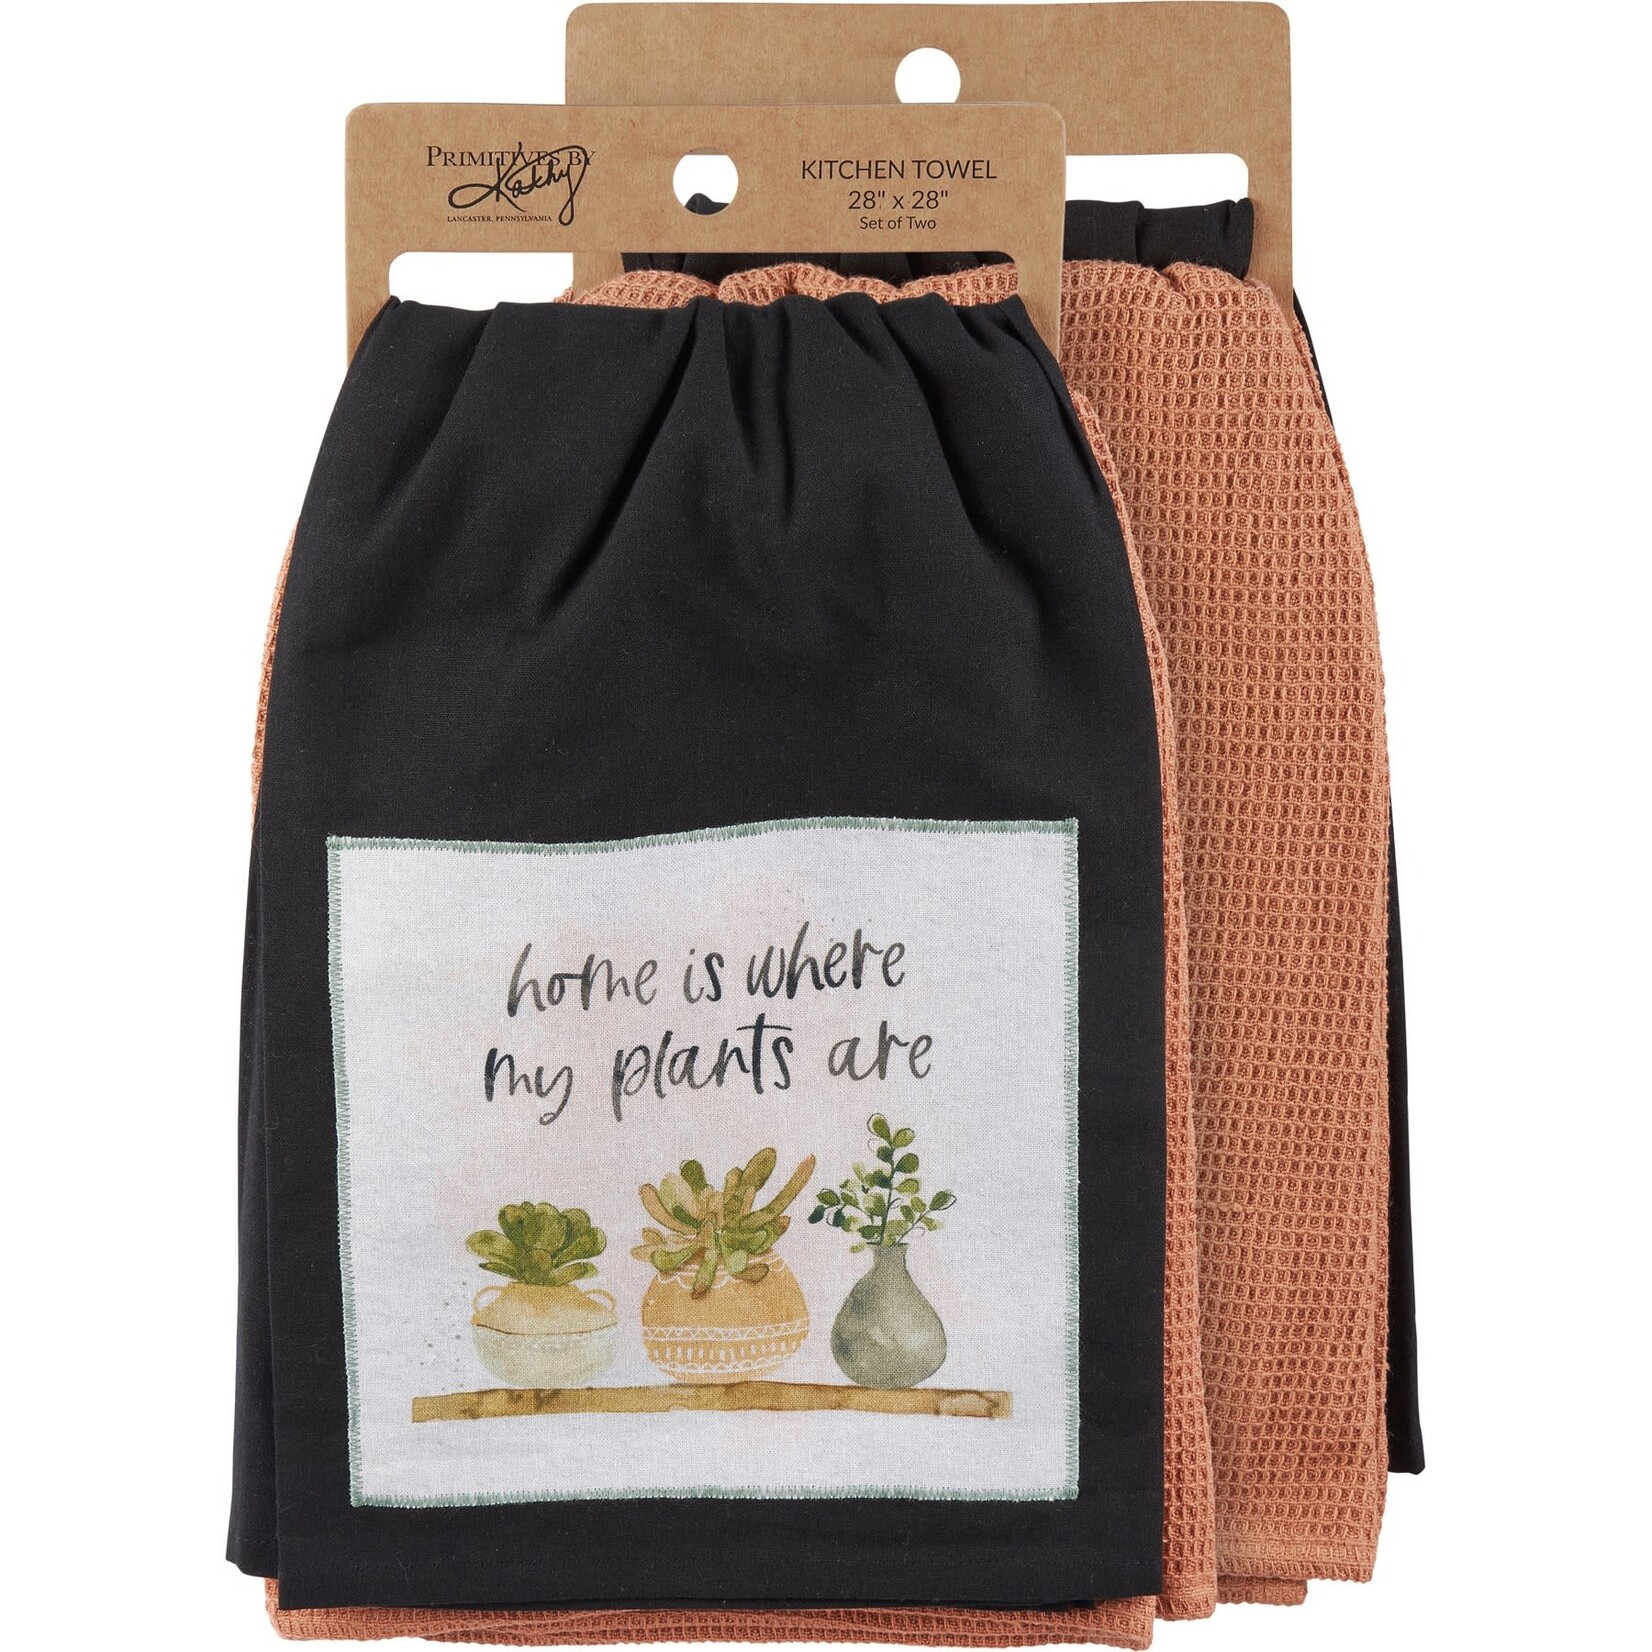 Primitives by Kathy Home Is Where my Plants Tea Towel Set/2